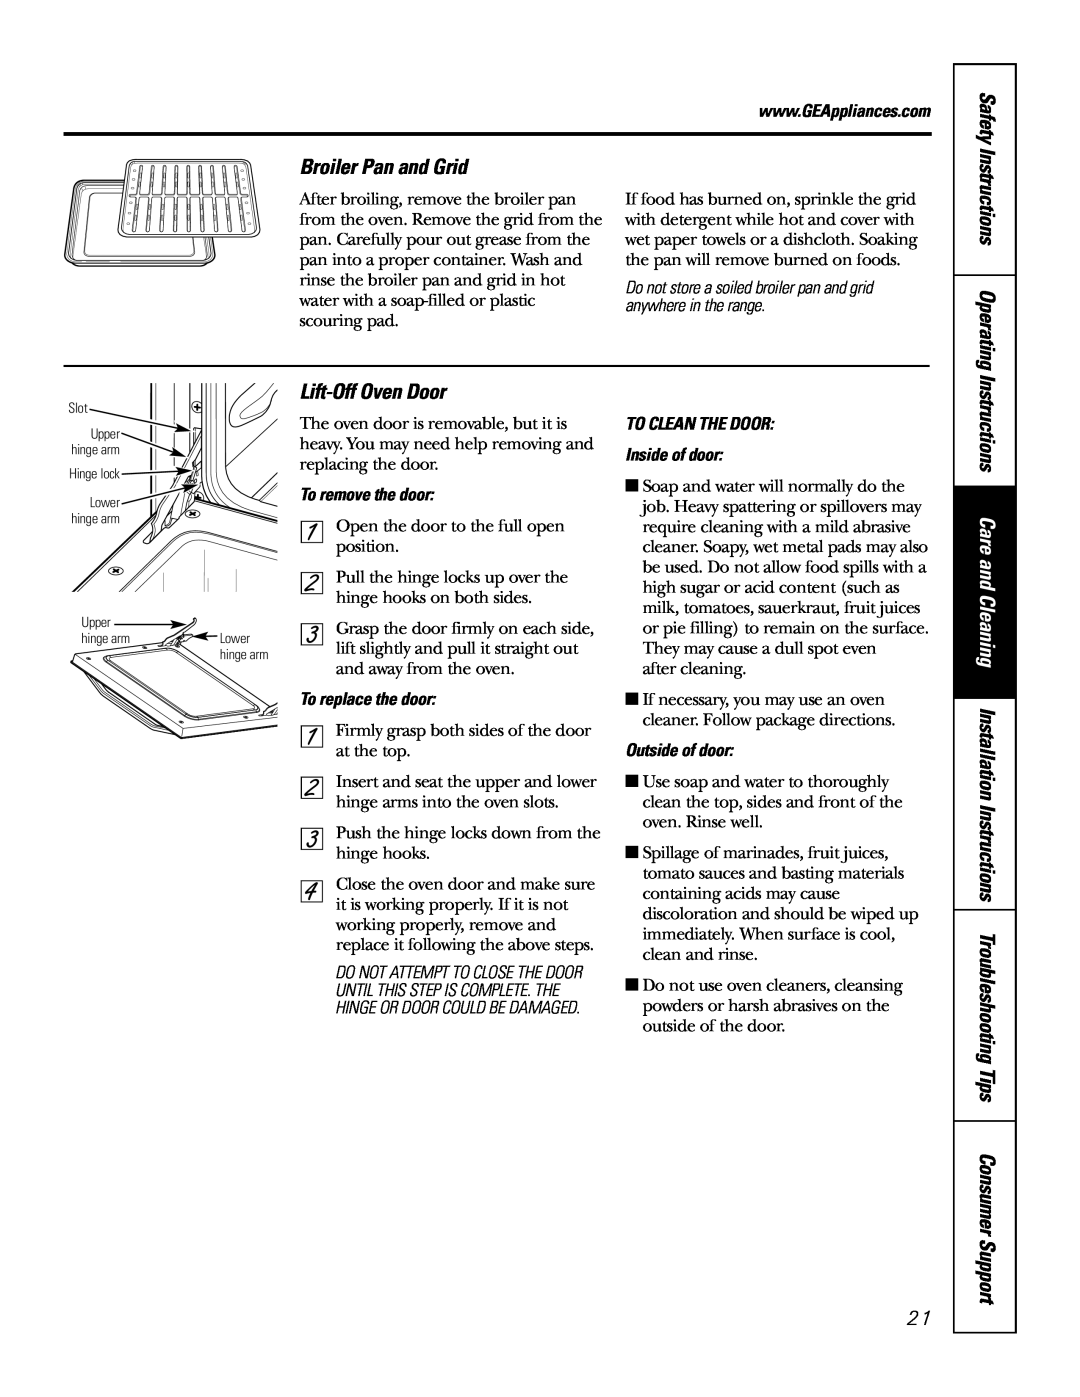 GE RGA624 Broiler Pan and Grid, Lift-Off Oven Door, Safety, Instructions Operating, To remove the door, Outside of door 